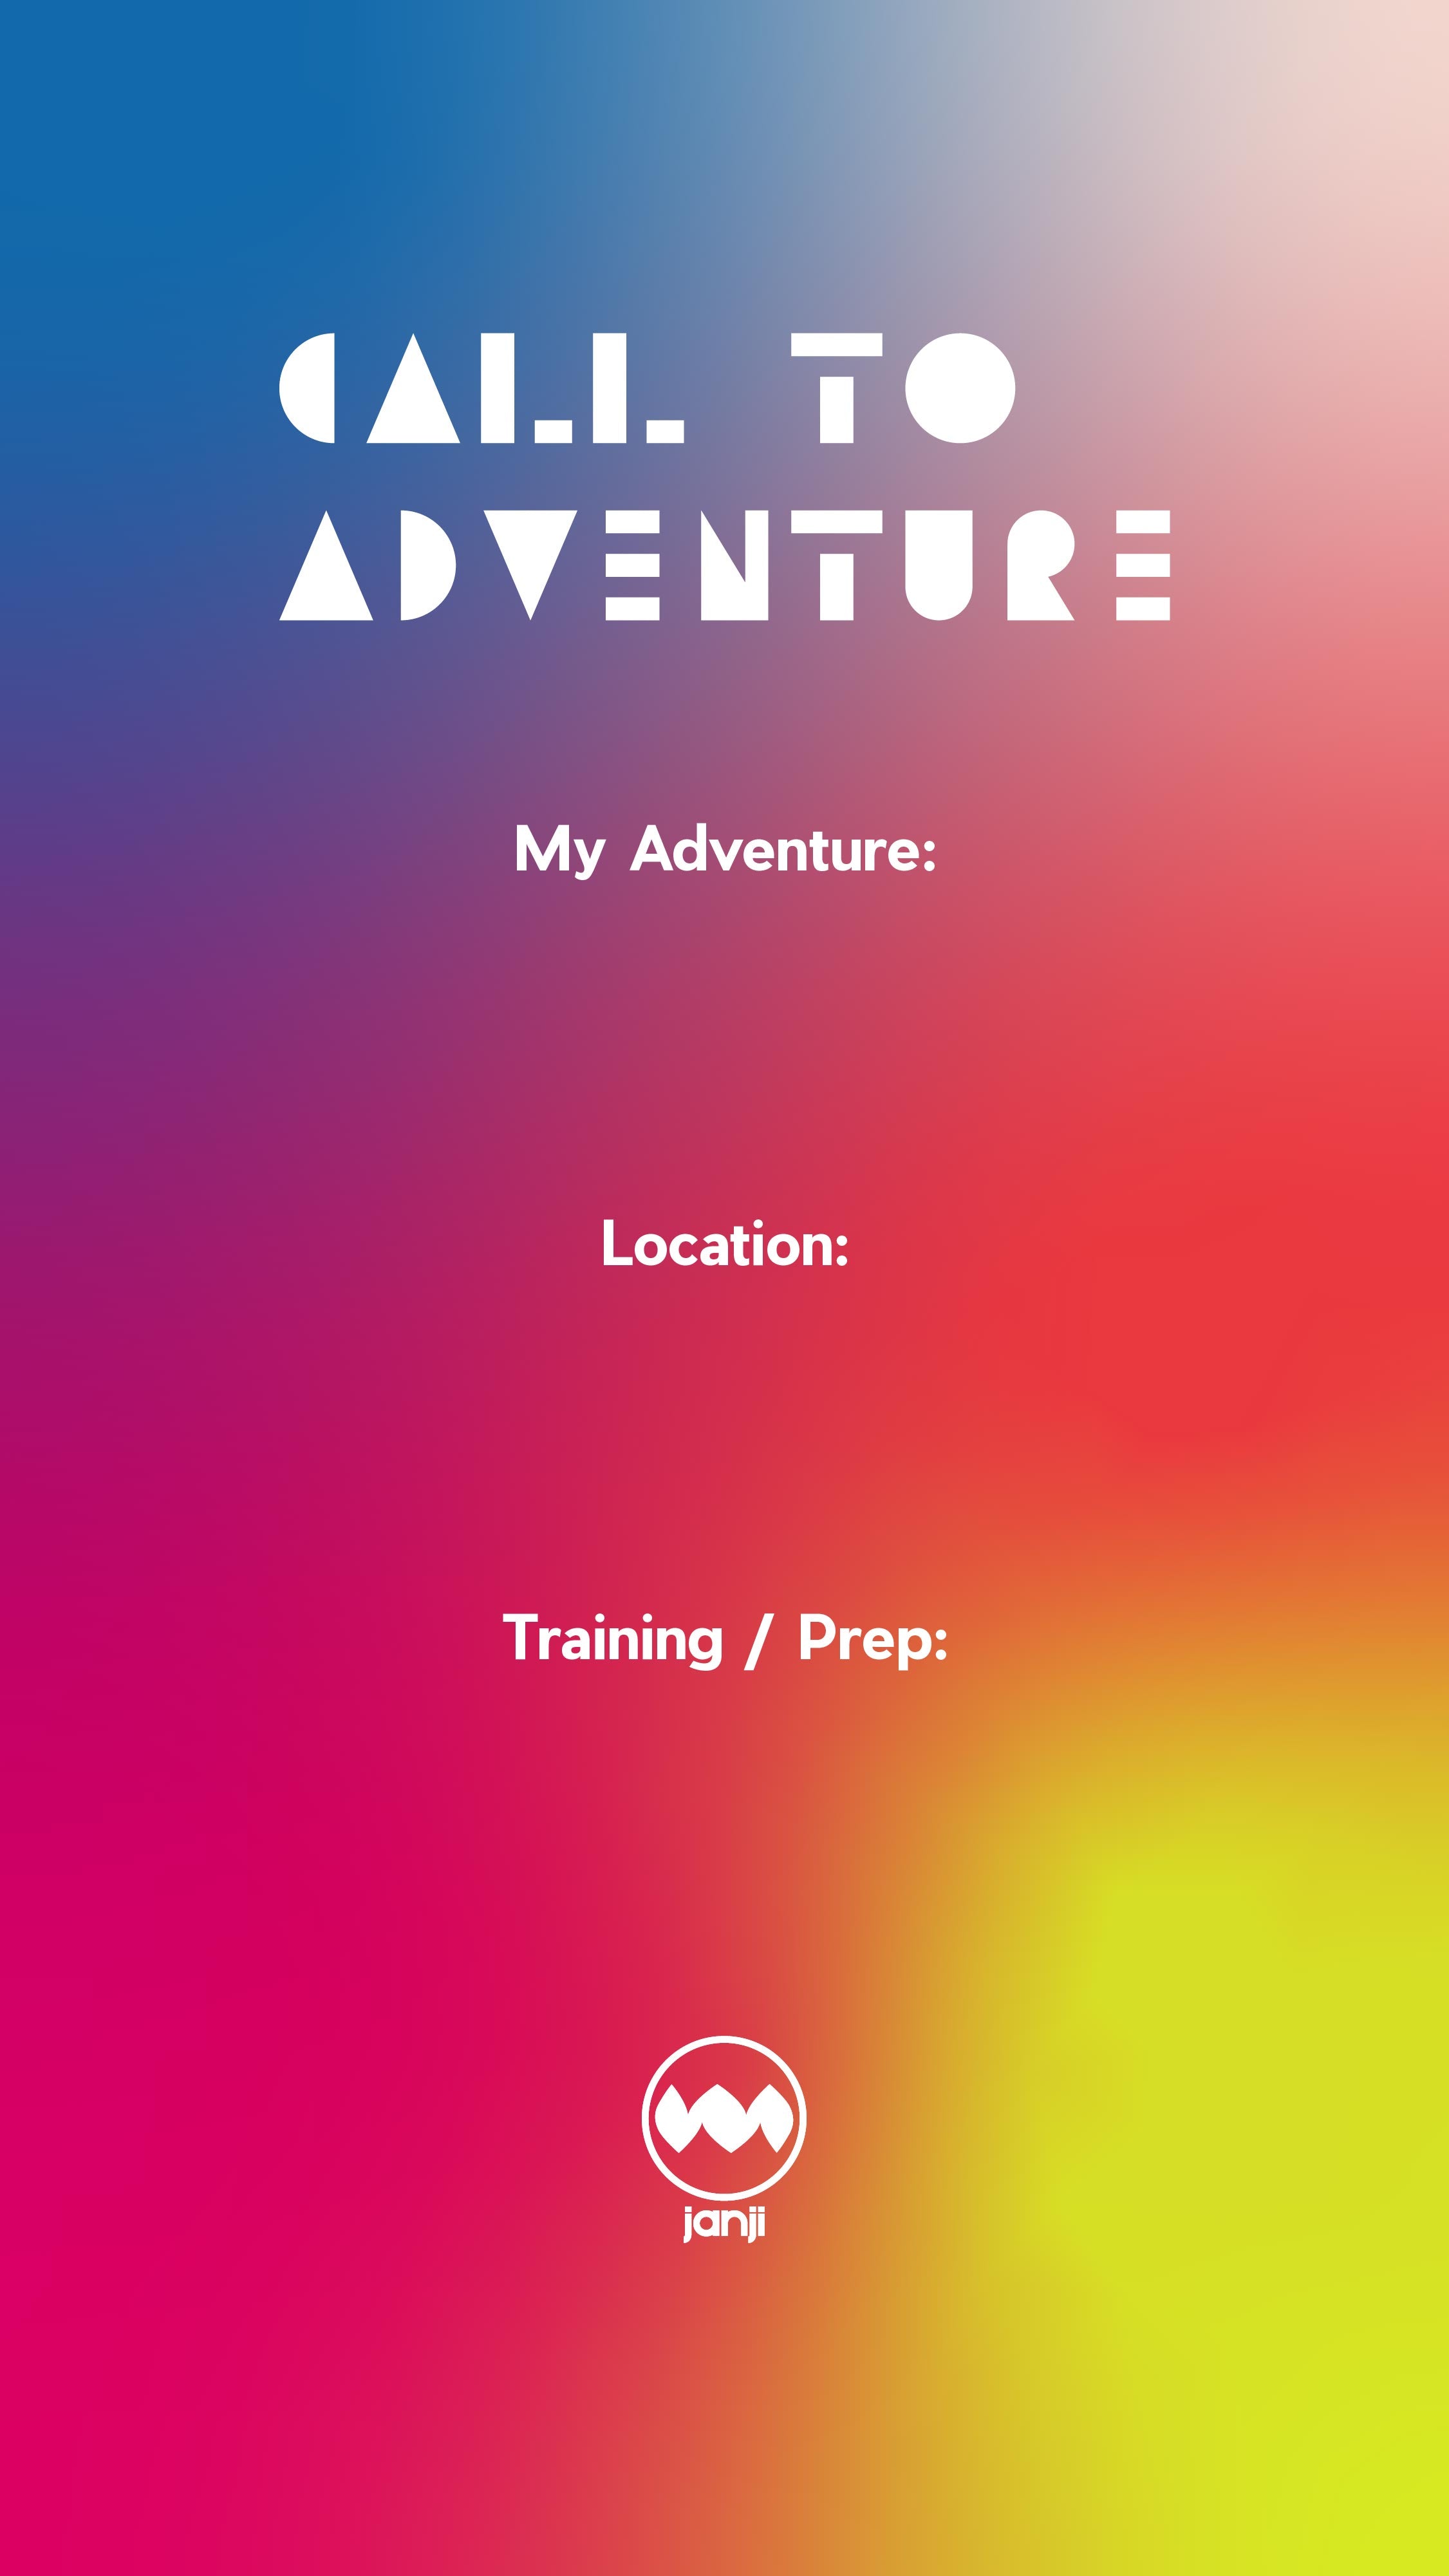 Template for social media with a gradient background and three categories; My Adventure, Location, Training/Prep